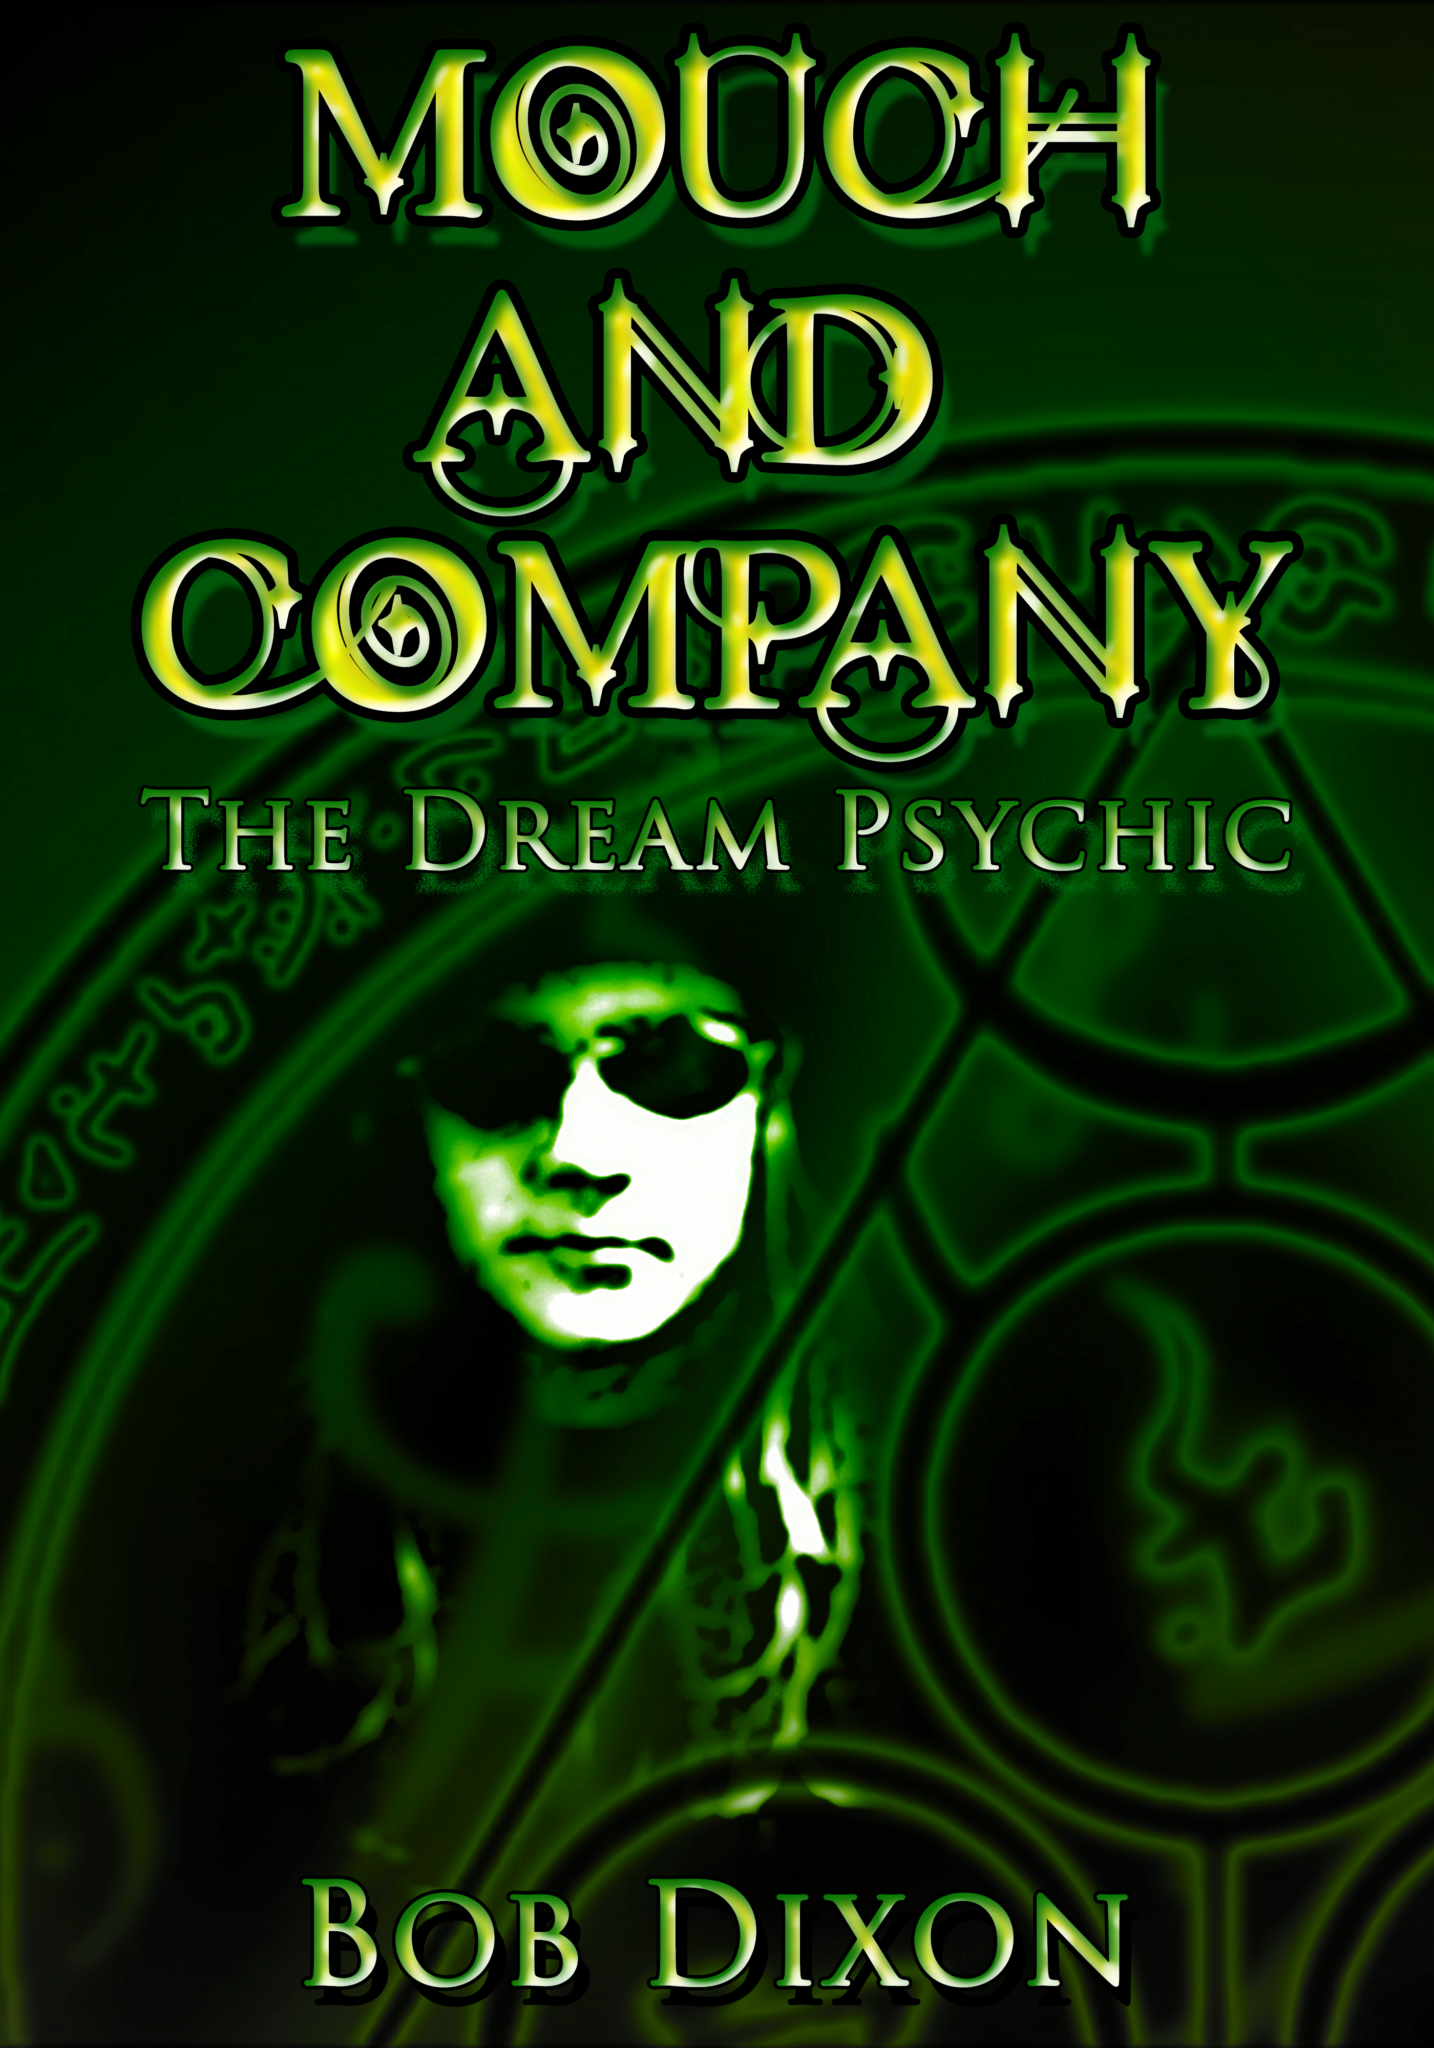 Mouch and Company: The Dream Psychic by Bob Dixon